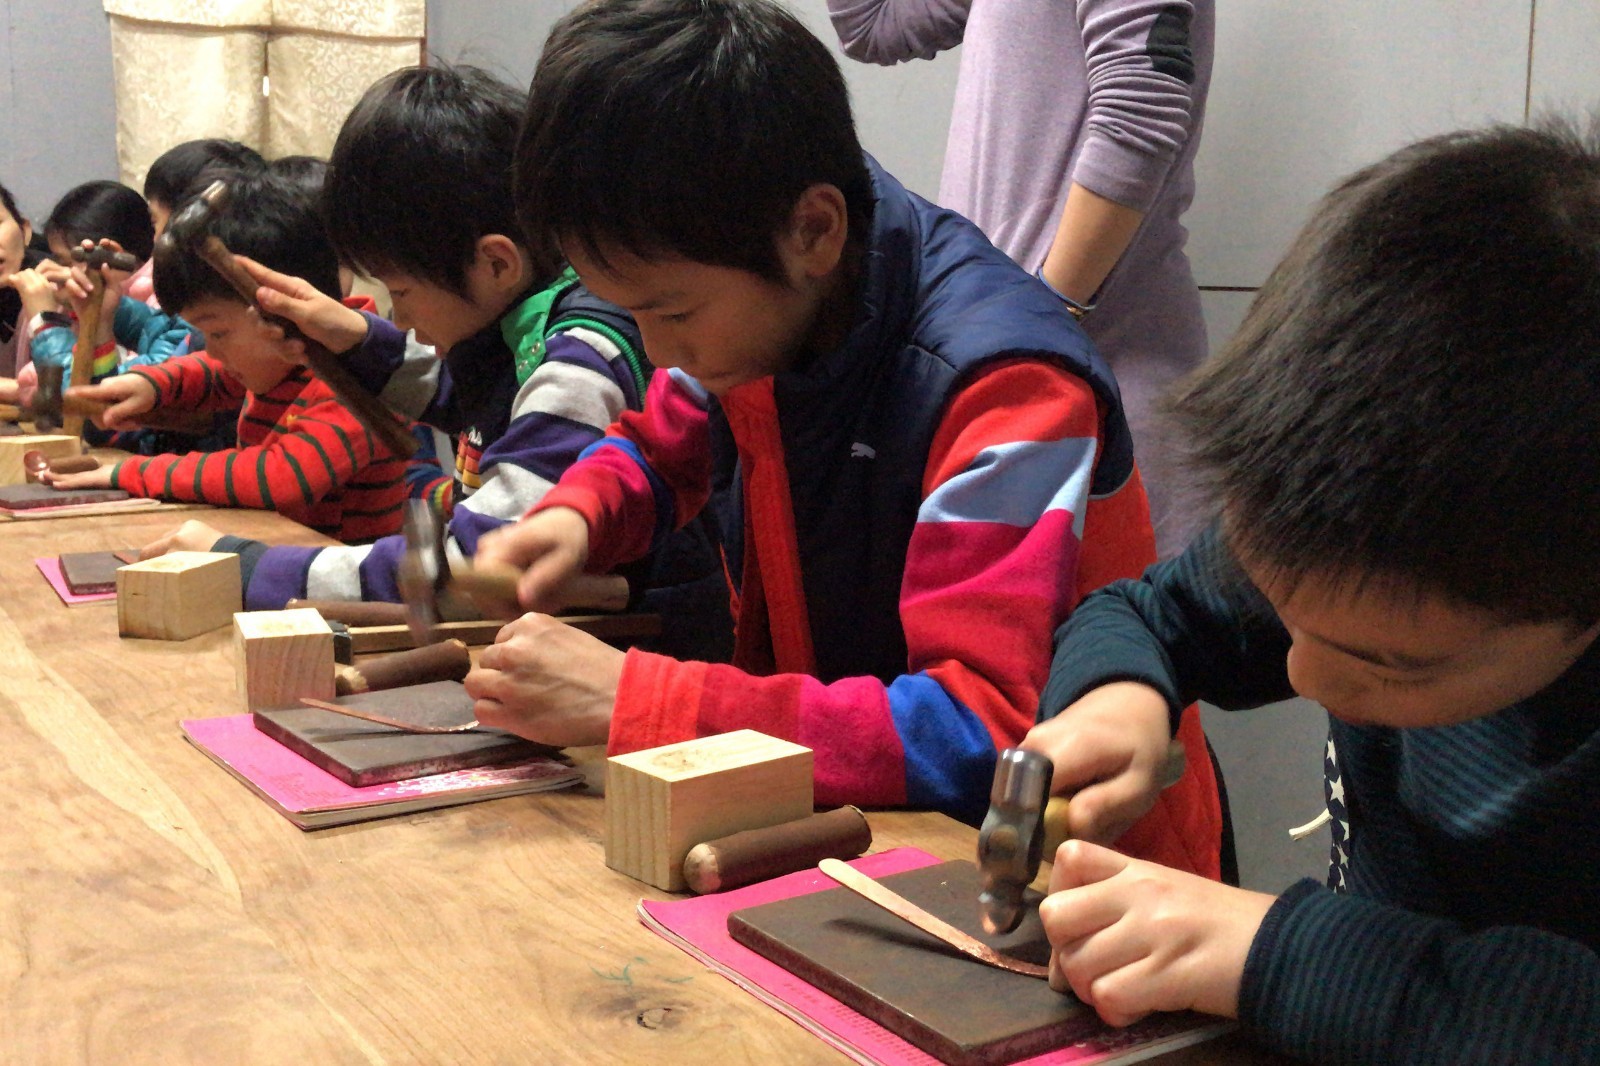 cultural experiencing activities are planned for tourists to sense the local artistic and cultural aesthetics as well as the vitality of the community through the visits and DIY experiences. | Taipei Cultural experience | CAN Culture